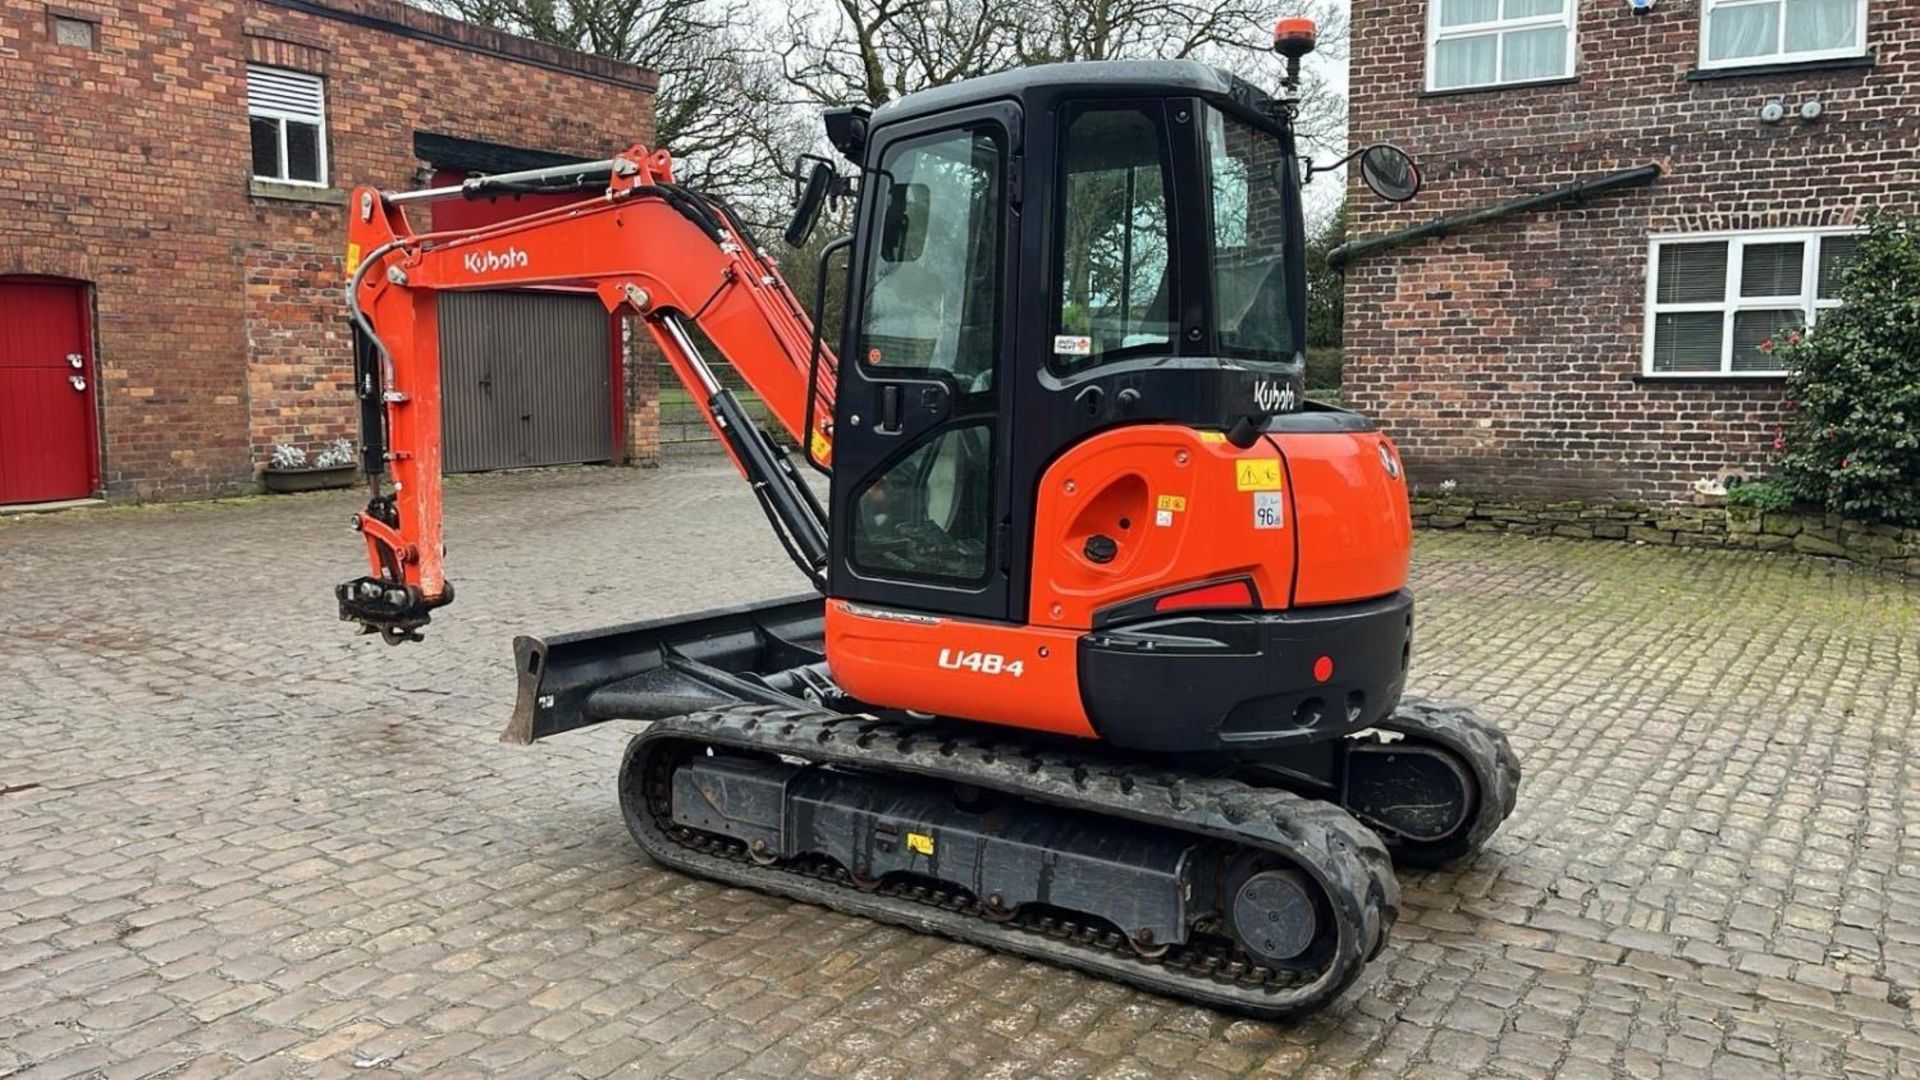 2019 KUBOTA U48-4 COMPACT EXCAVATOR 552 HOURS WITH HYDRAULIC QUICK HITCH TO BE SOLD WITH 4 BUCKETS - Image 3 of 24